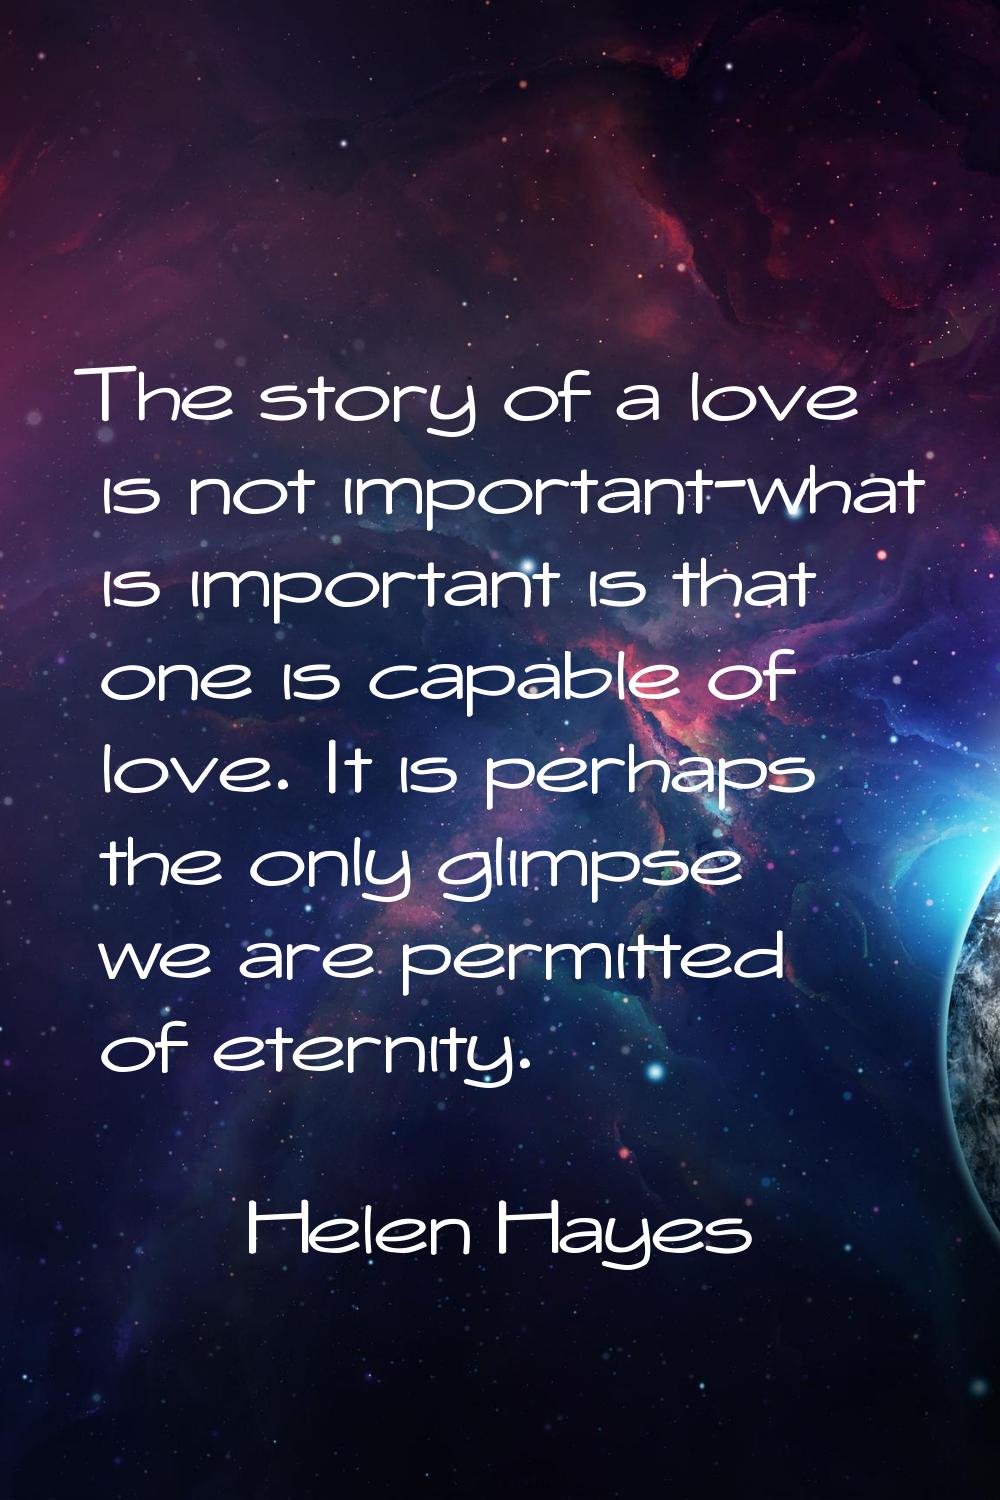 The story of a love is not important-what is important is that one is capable of love. It is perhap